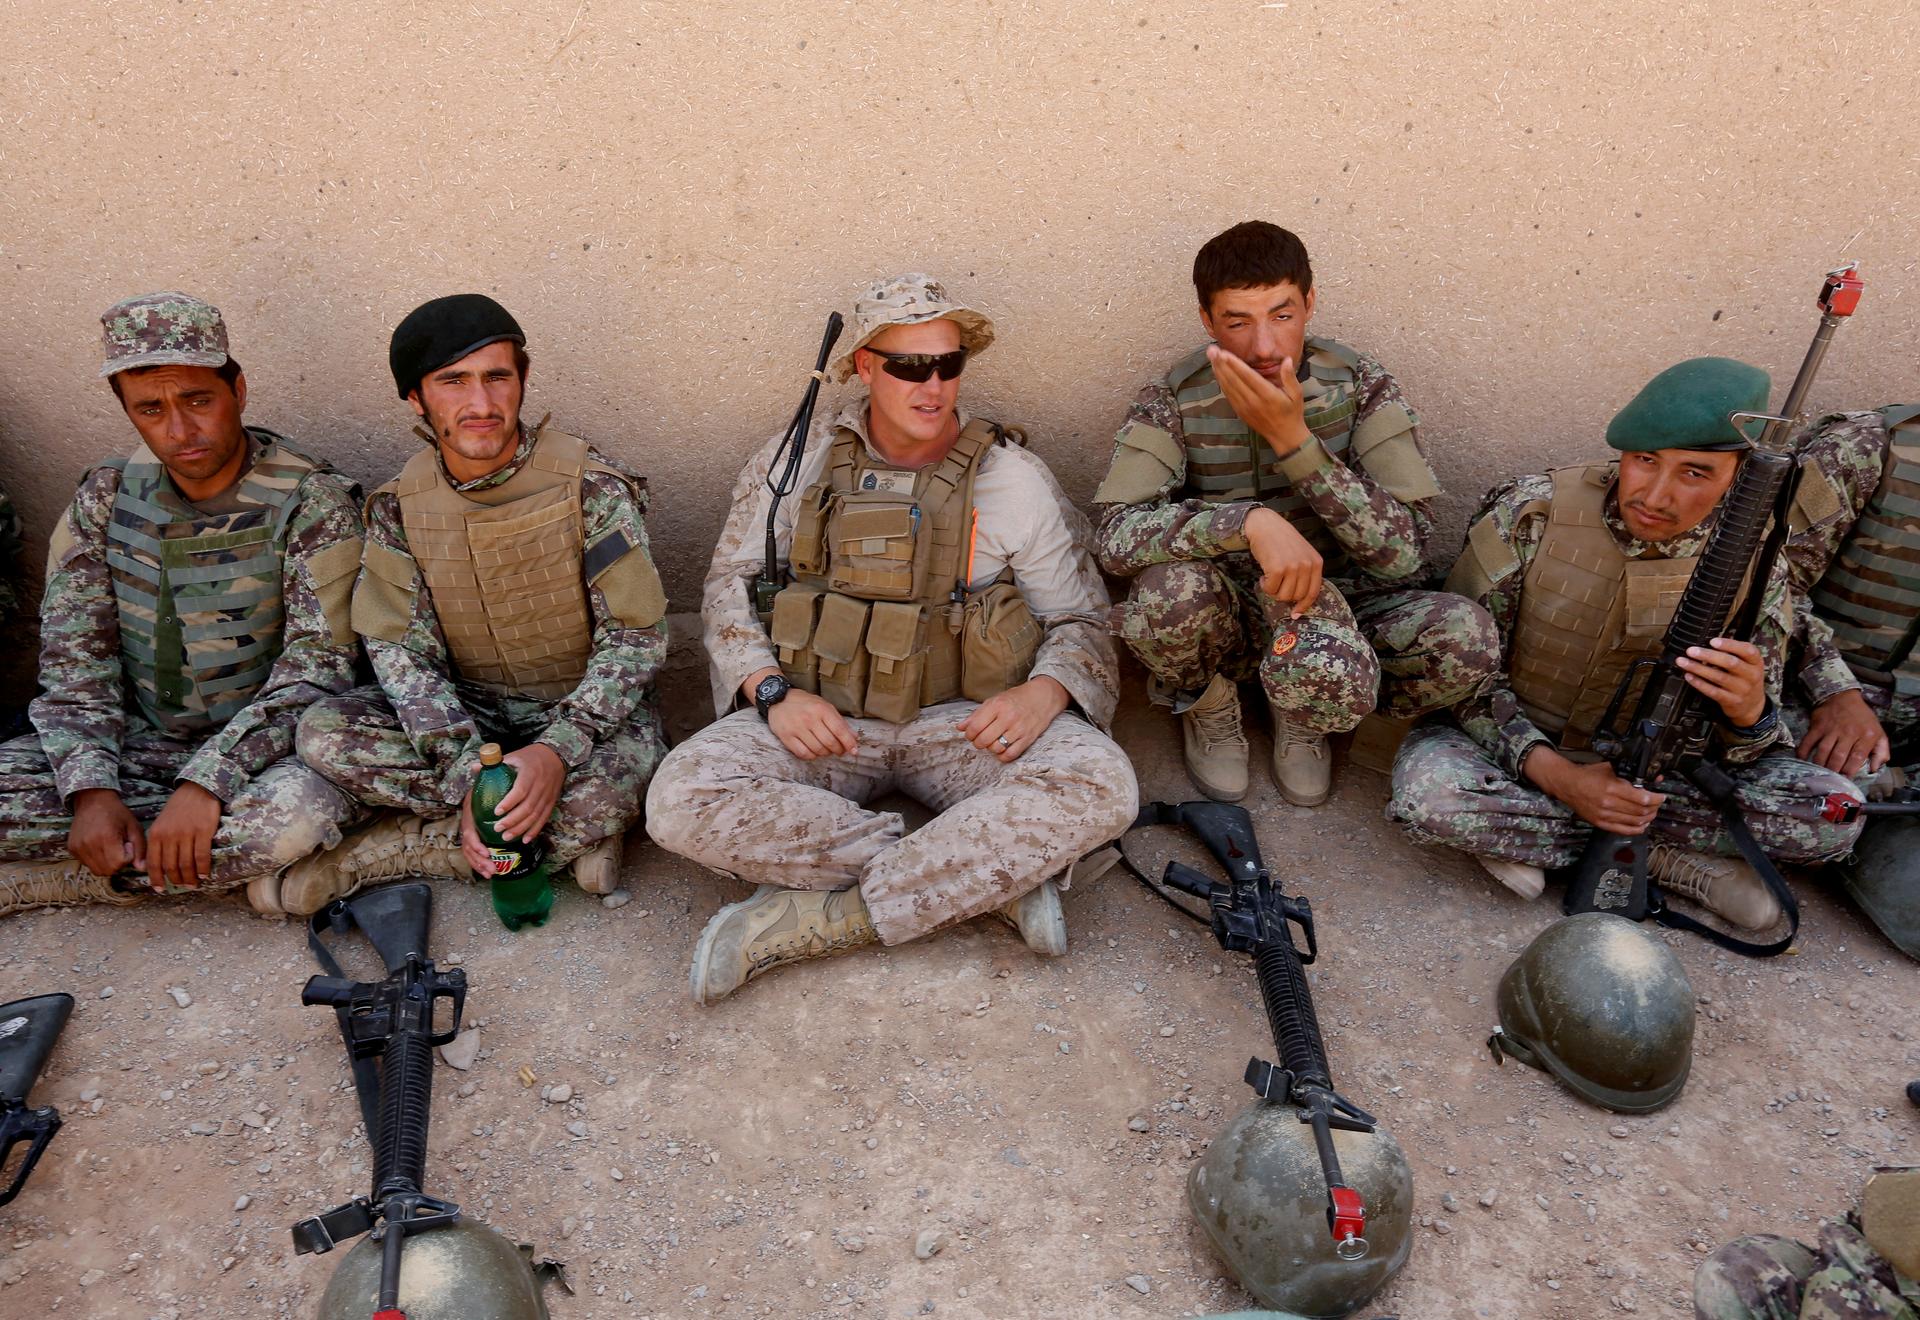 A US Marine (center) talks with Afghan National Army (ANA) soldiers during a training in Helmand province, Afghanistan, July 5, 2017.